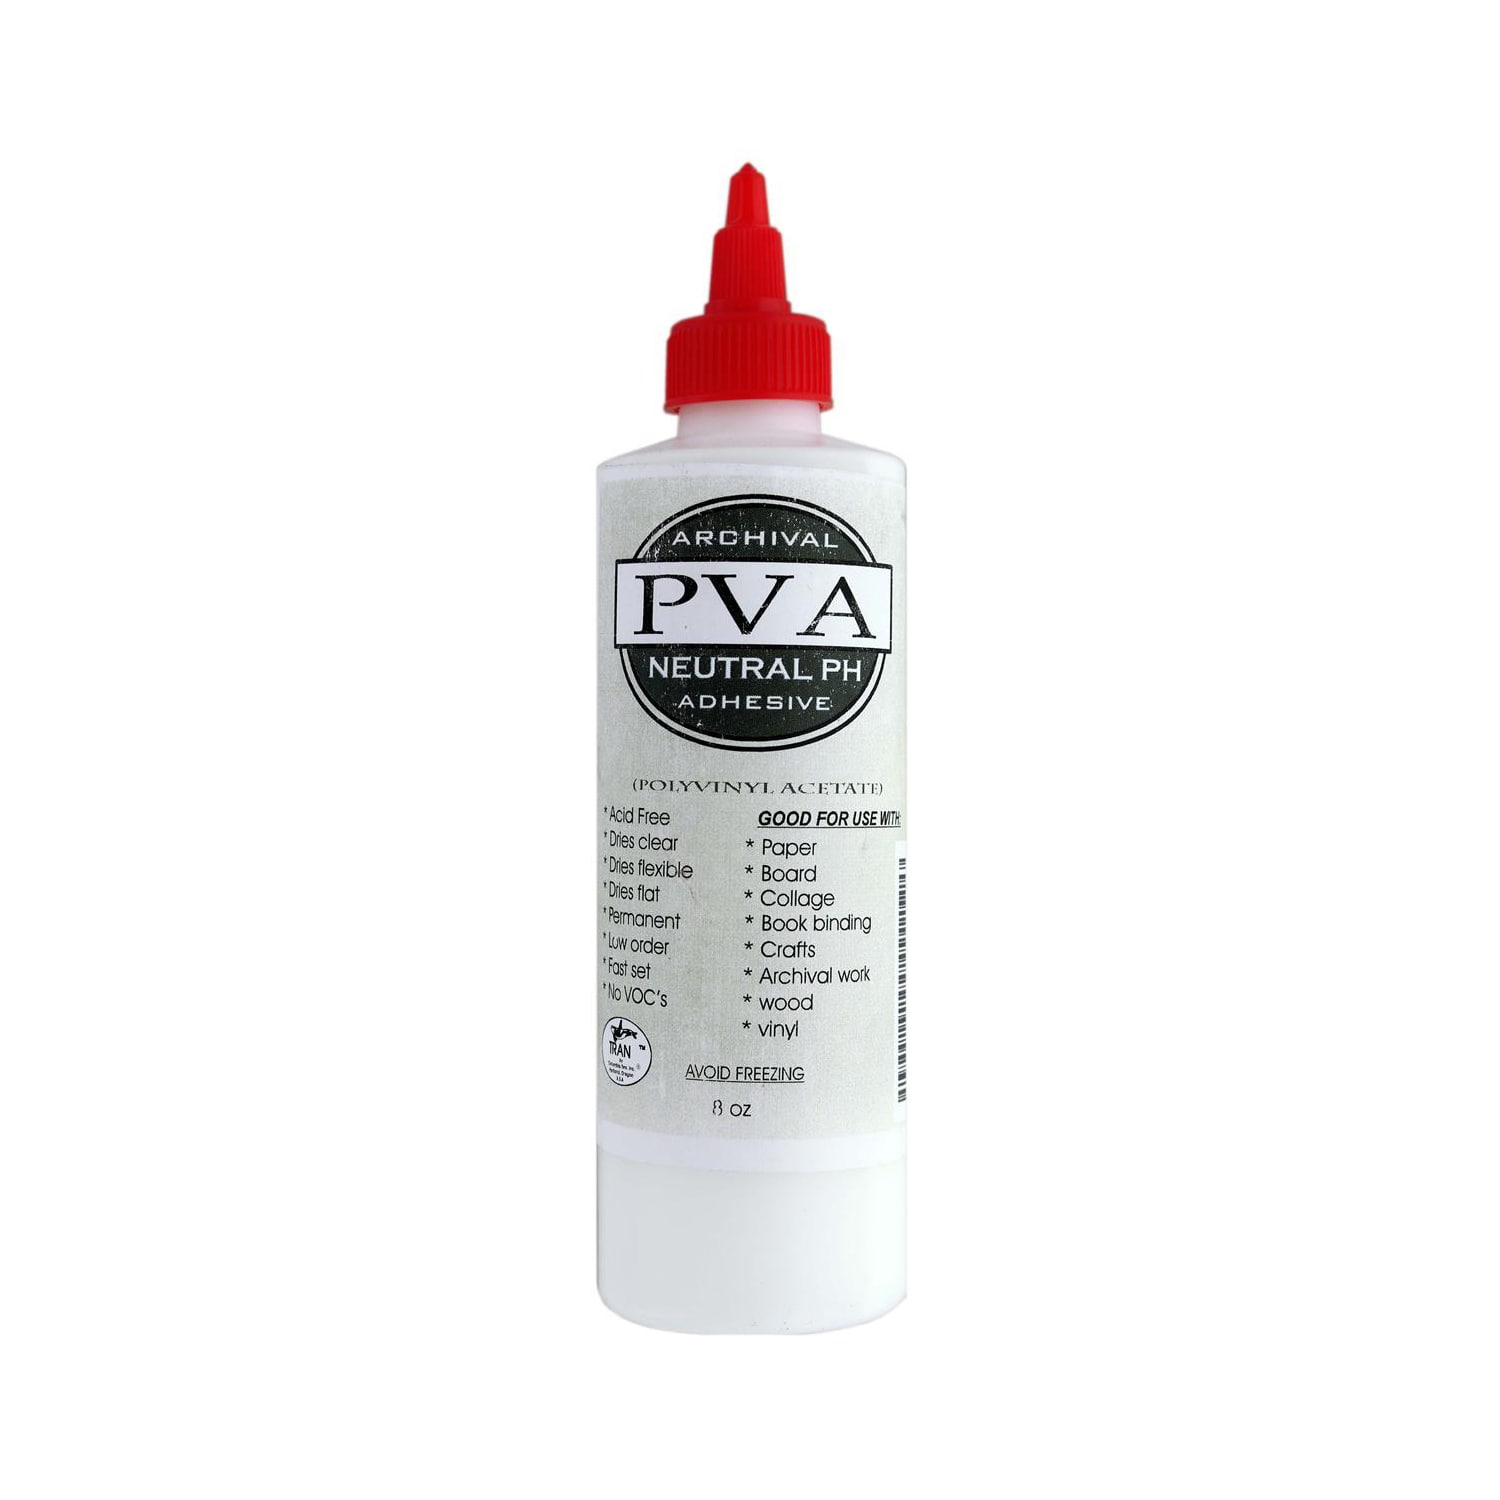 Technicqll 1 X Clear Pva Adhesive Glue For Paper Cardboard Diy Models Books  Water Resistant Strong 80Ml